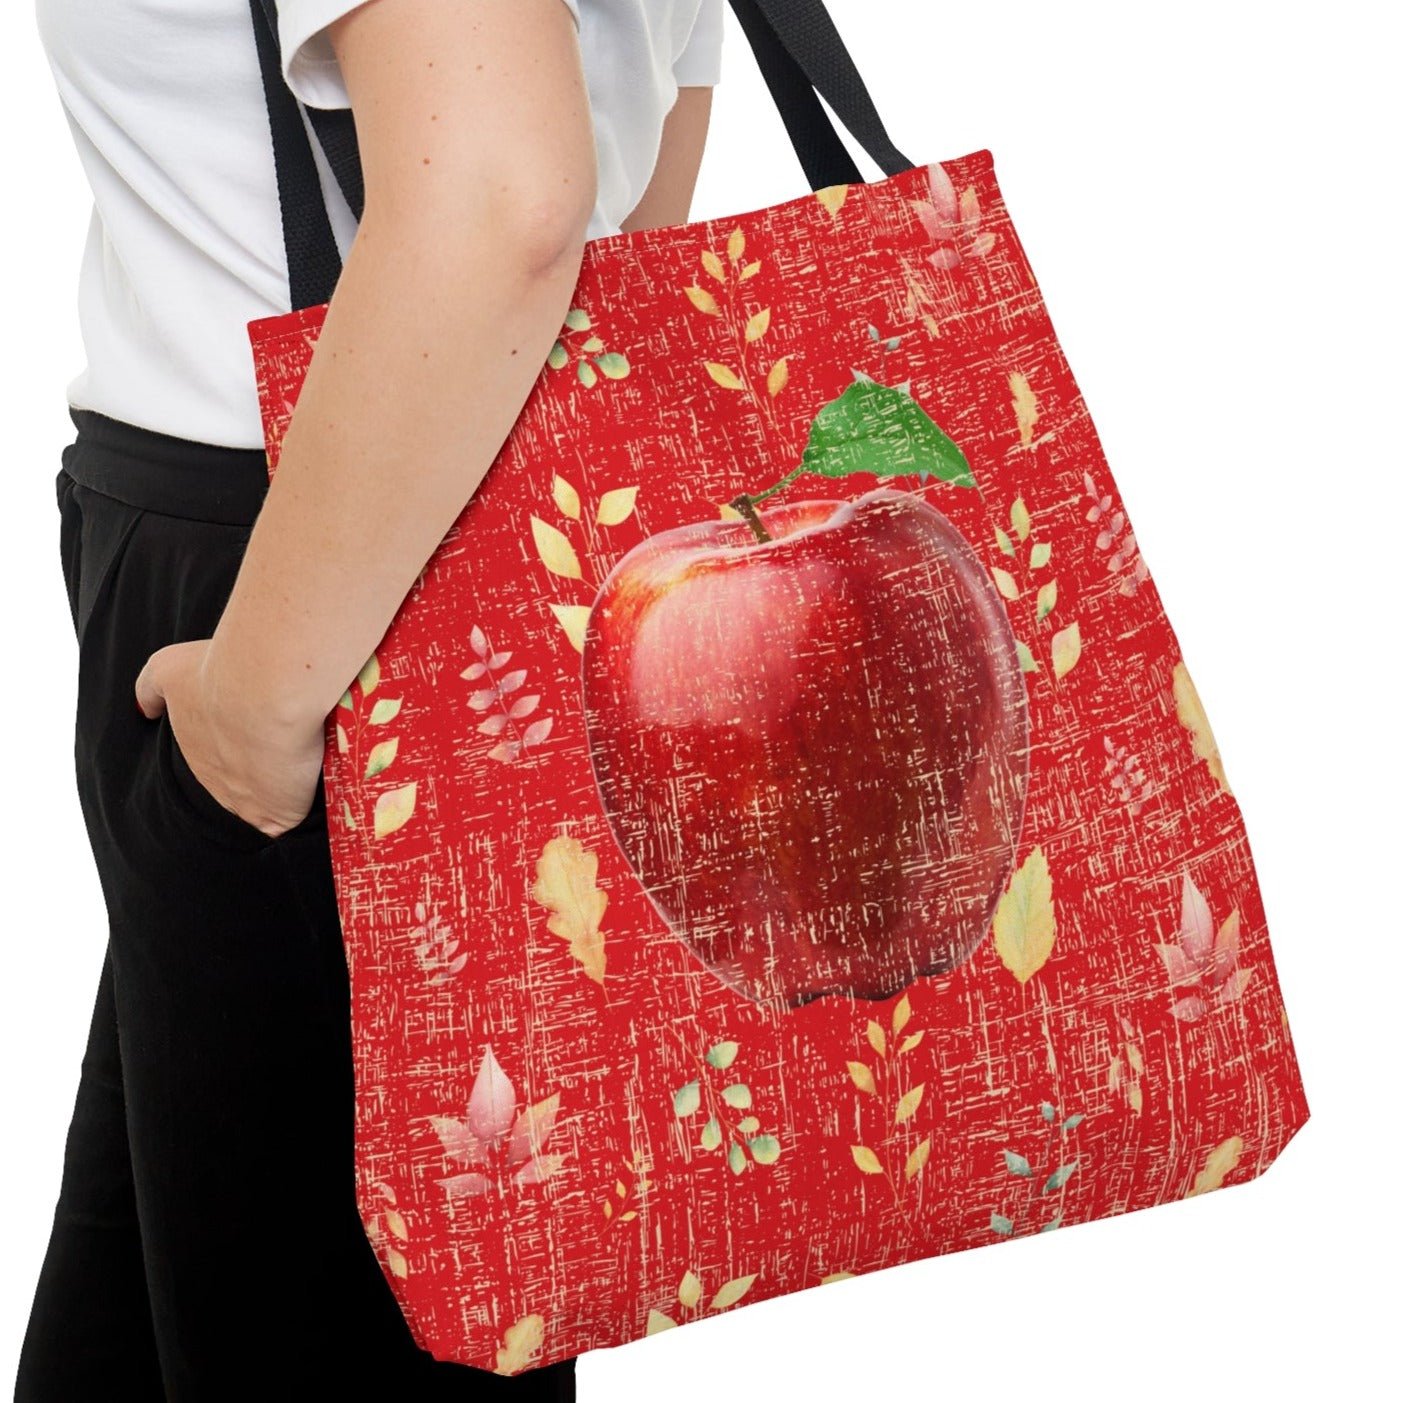 Bright Red Apple on Red Leaf Pattern Large Tote Bag - Fresh and Vibrant Fall Accessory - Eddy and Rita